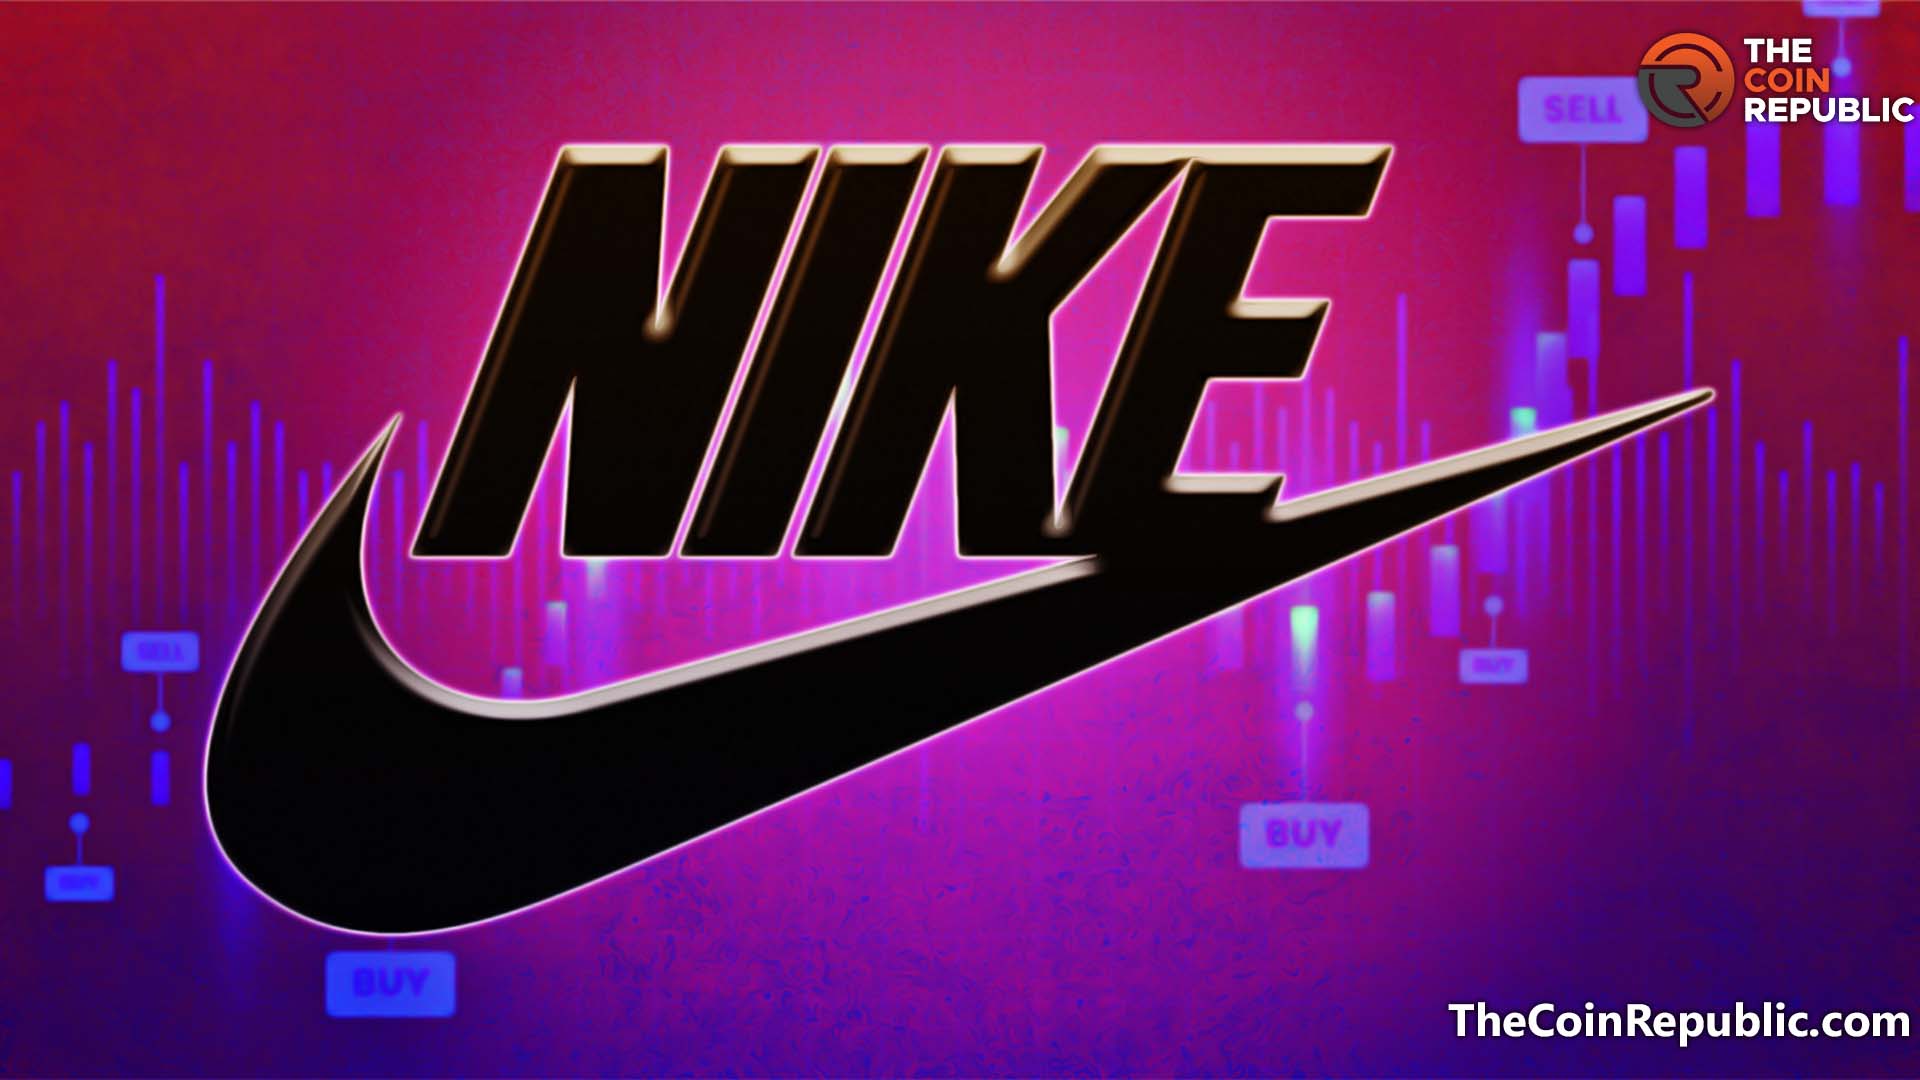 Direct Sales Leading Nike, Inc. Is it about to Sell NKE Shares, Nike Stock Price May Return? - The Republic